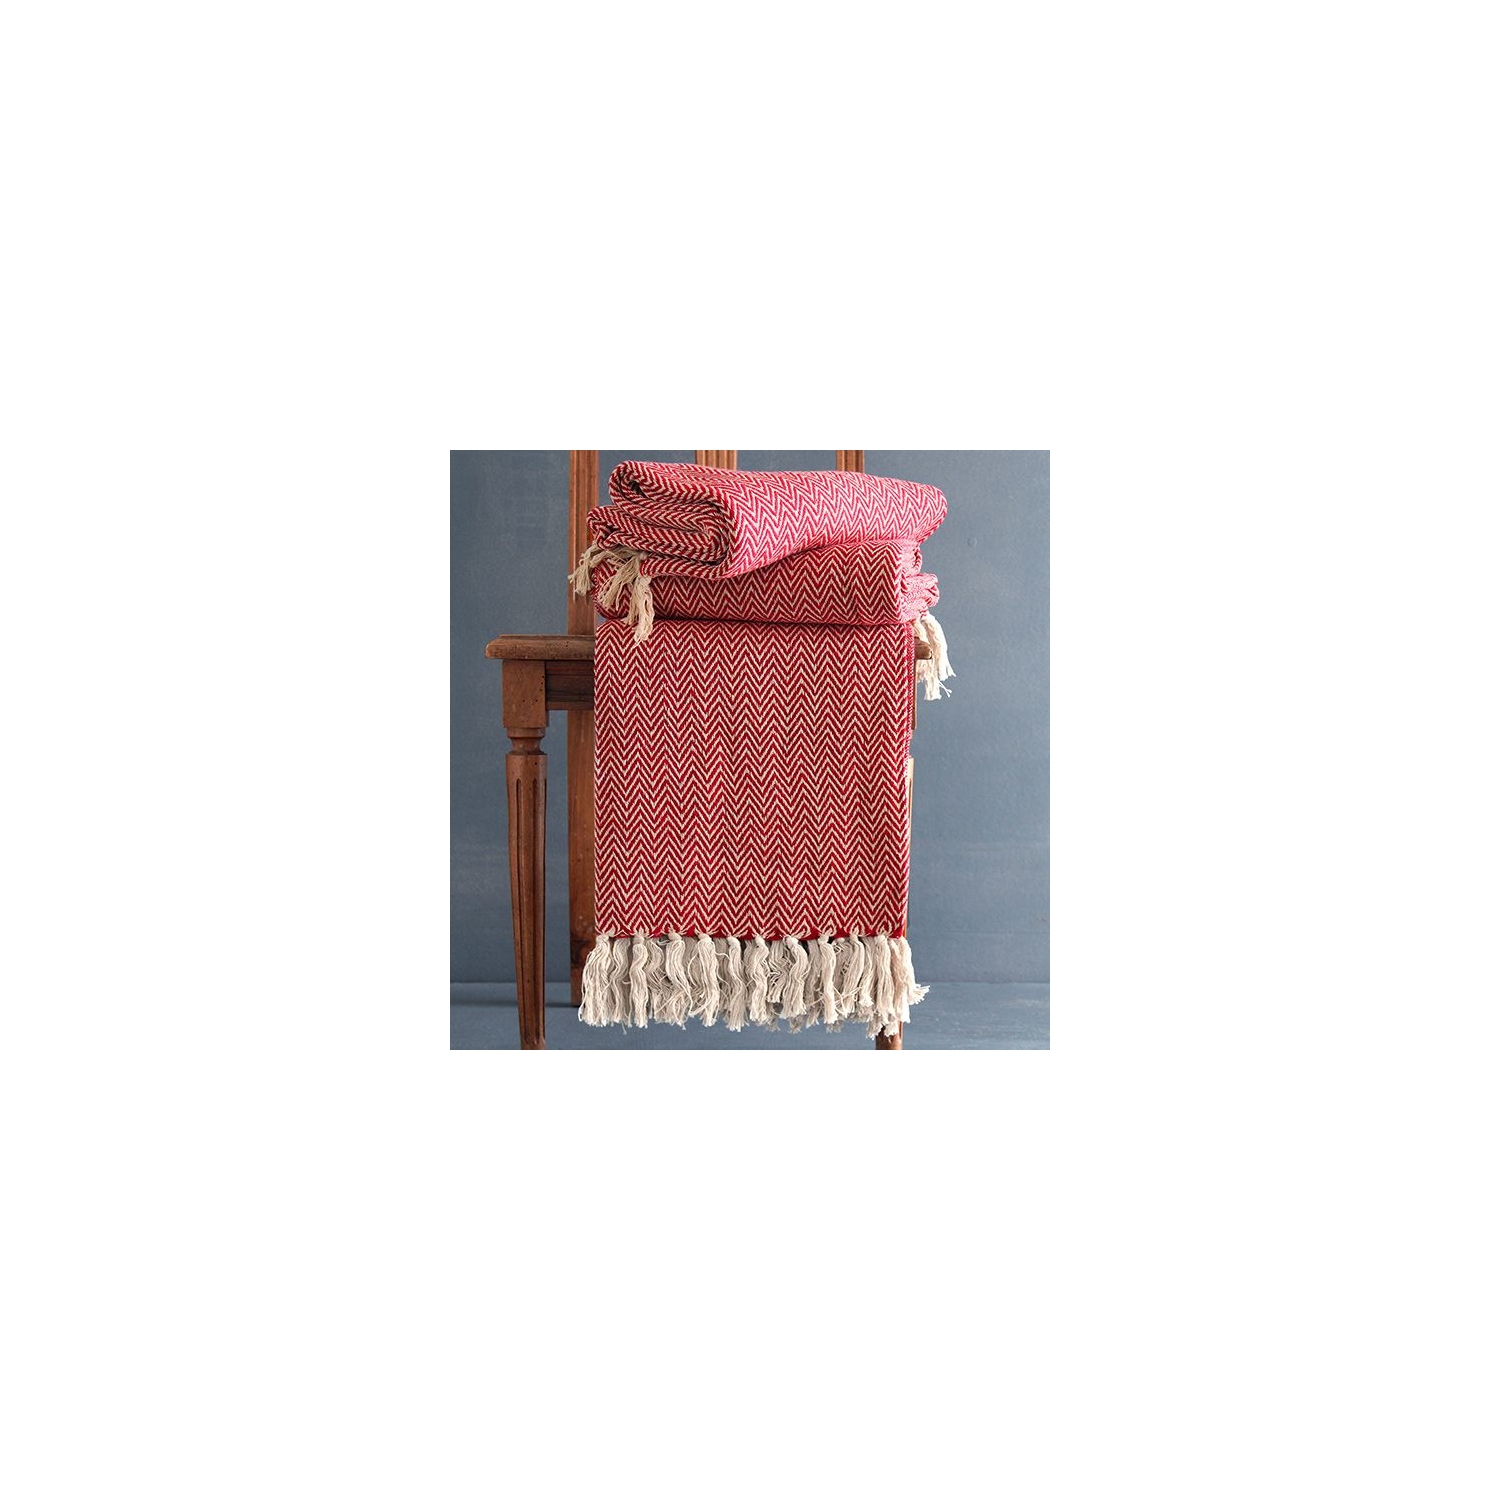 Indian cotton sofa throw red and white